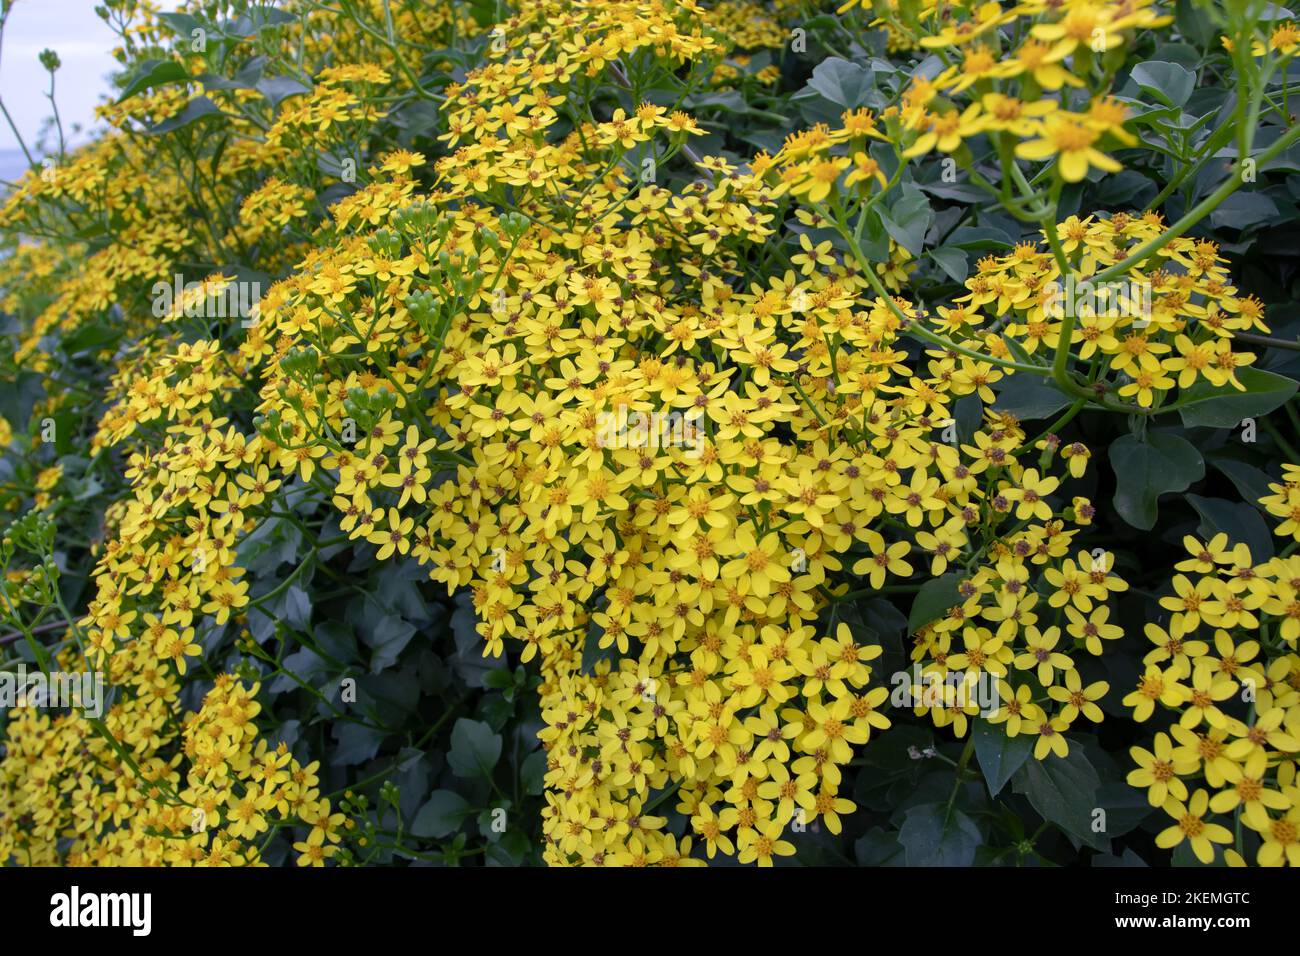 Senecio angulatus or creeping groundsel or Cape ivy succulent flowering plant in the family Asteraceae with abundant yellow flowers closeup Stock Photo